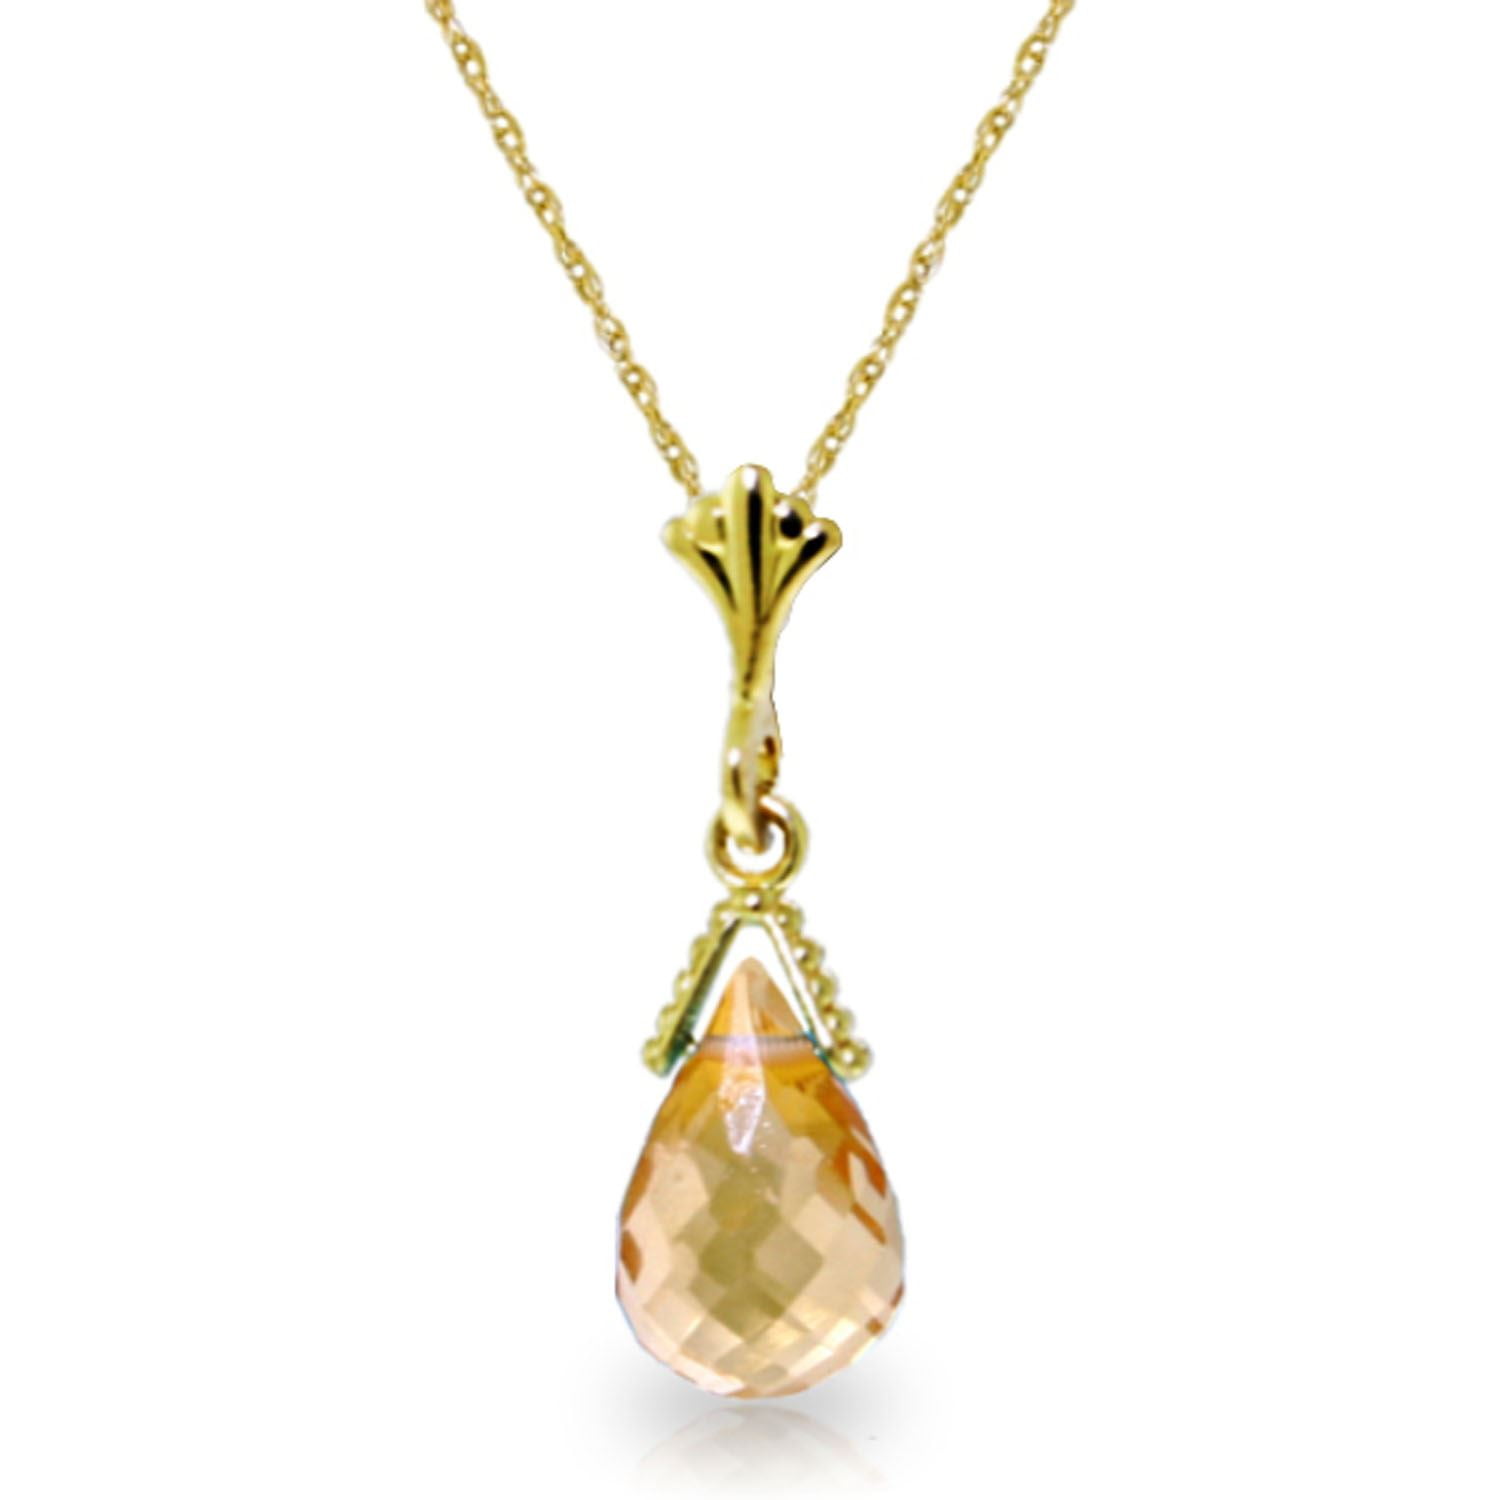 Citrine Peridot with 20 Inch Chain Length ALARRI 2.4 Carat 14K Solid Rose Gold Necklace Blue Topaz